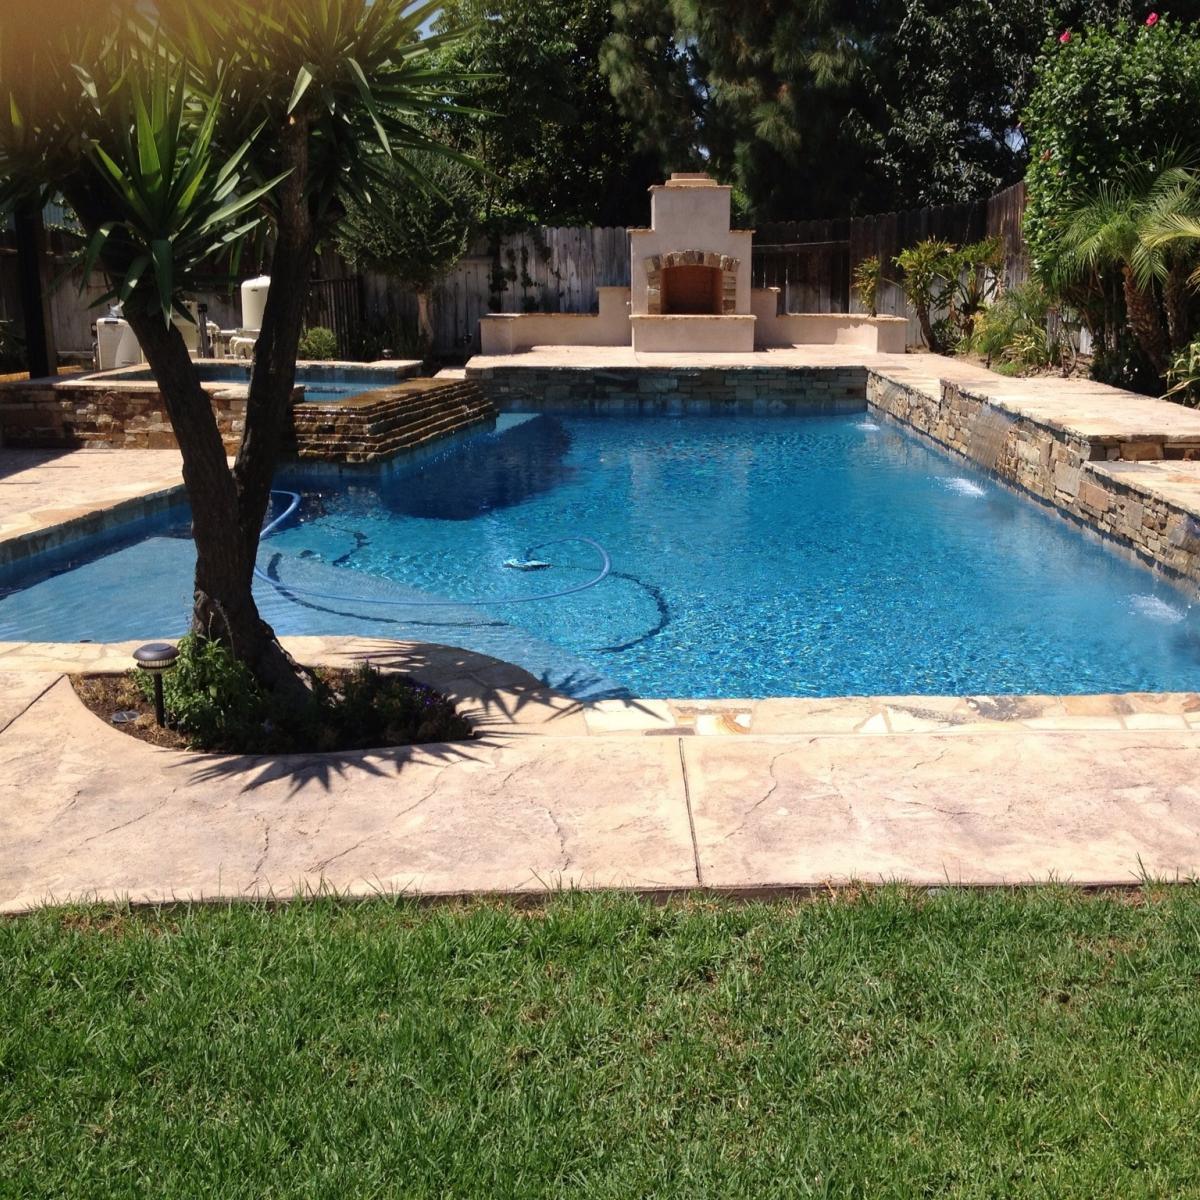 Sapphire Pool and Spa specializes in designing & constructing custom in ground swimming pools in Southern California.